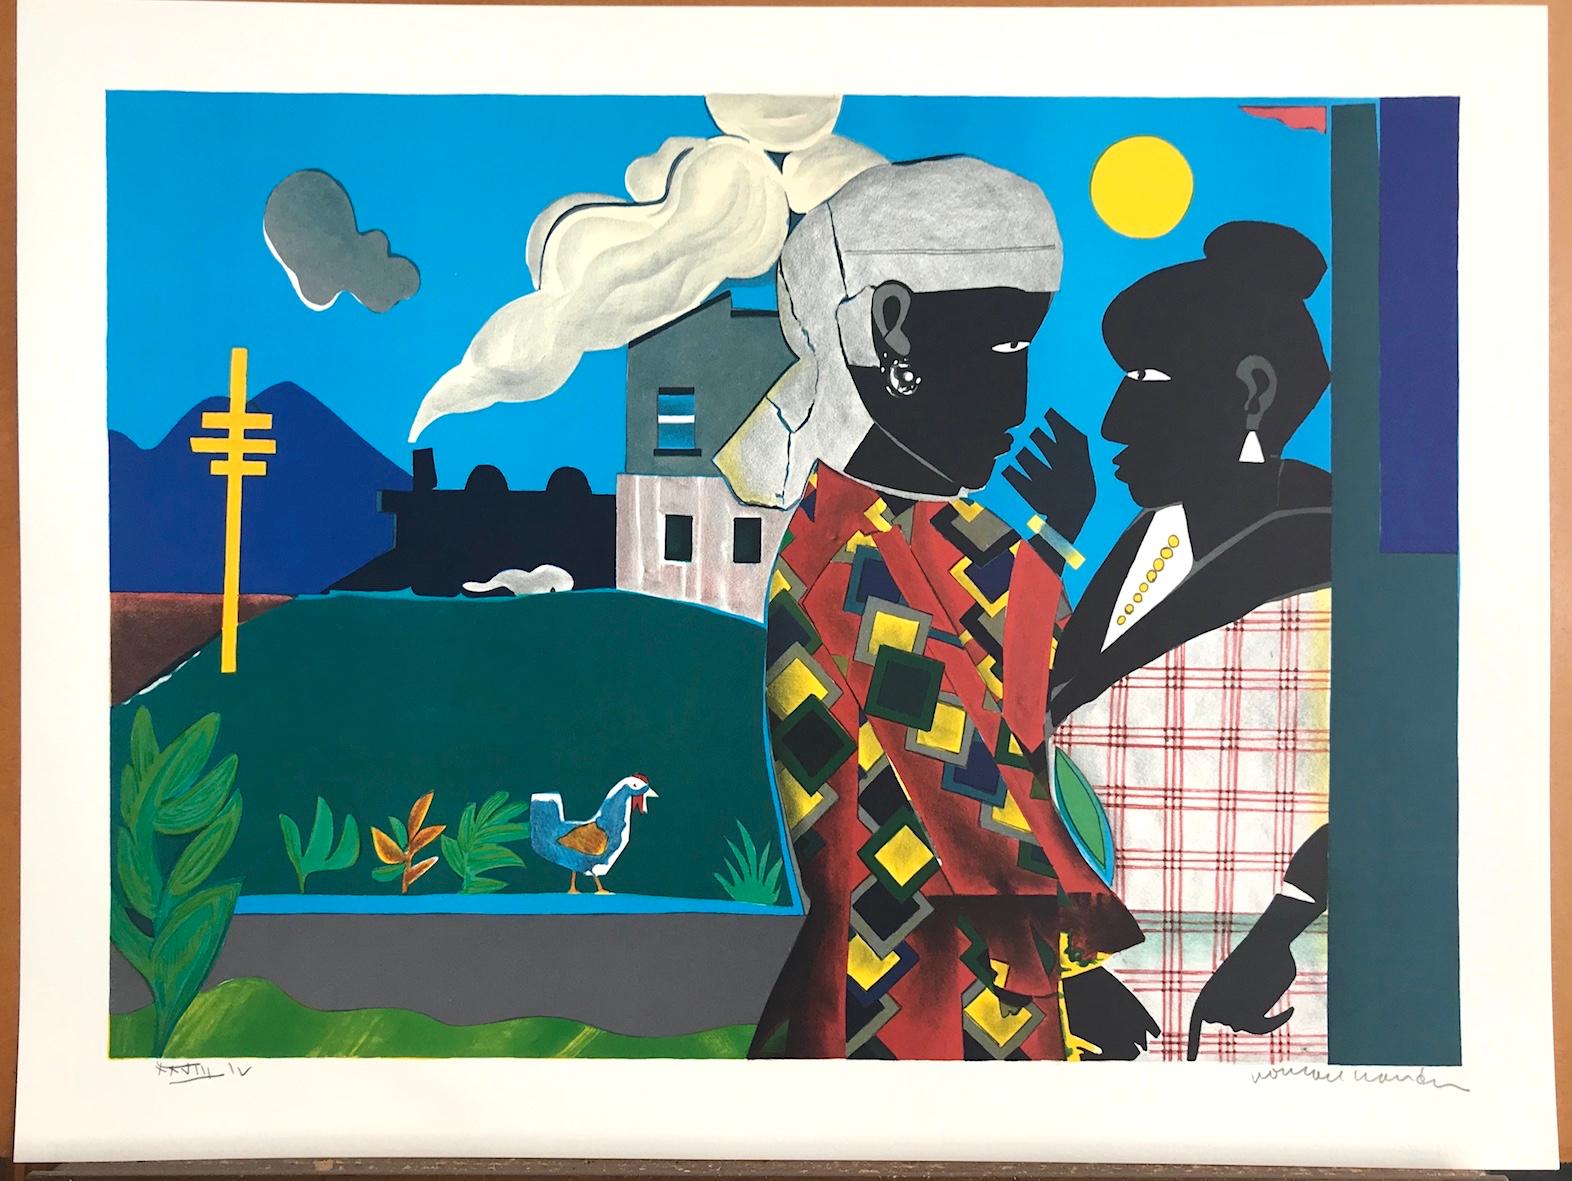 THE CONVERSATION Signed Lithograph, Black Women, Train, African American Culture - Contemporary Print by Romare Bearden